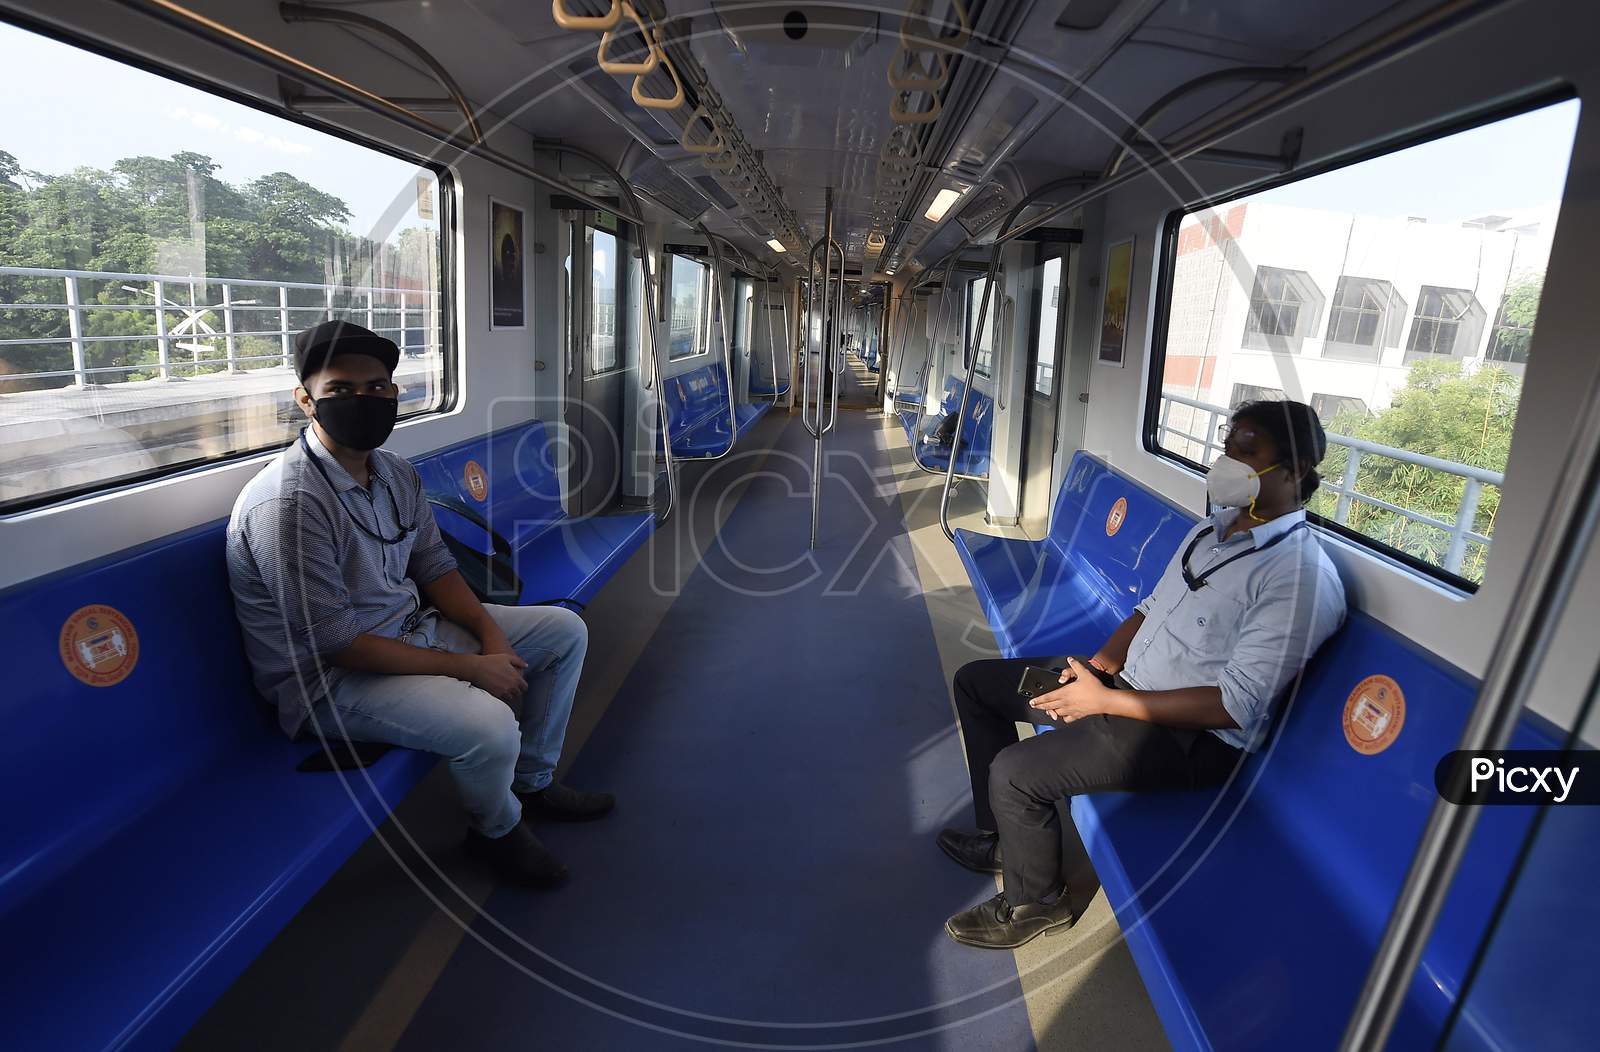 Commuters Travel In Metro Train Following Resumption Of Chennai Metro Services After Over Five Months Suspension Due To Covid-19 Outbreak, In Chennai, Teusday, Sep.8, 2020.